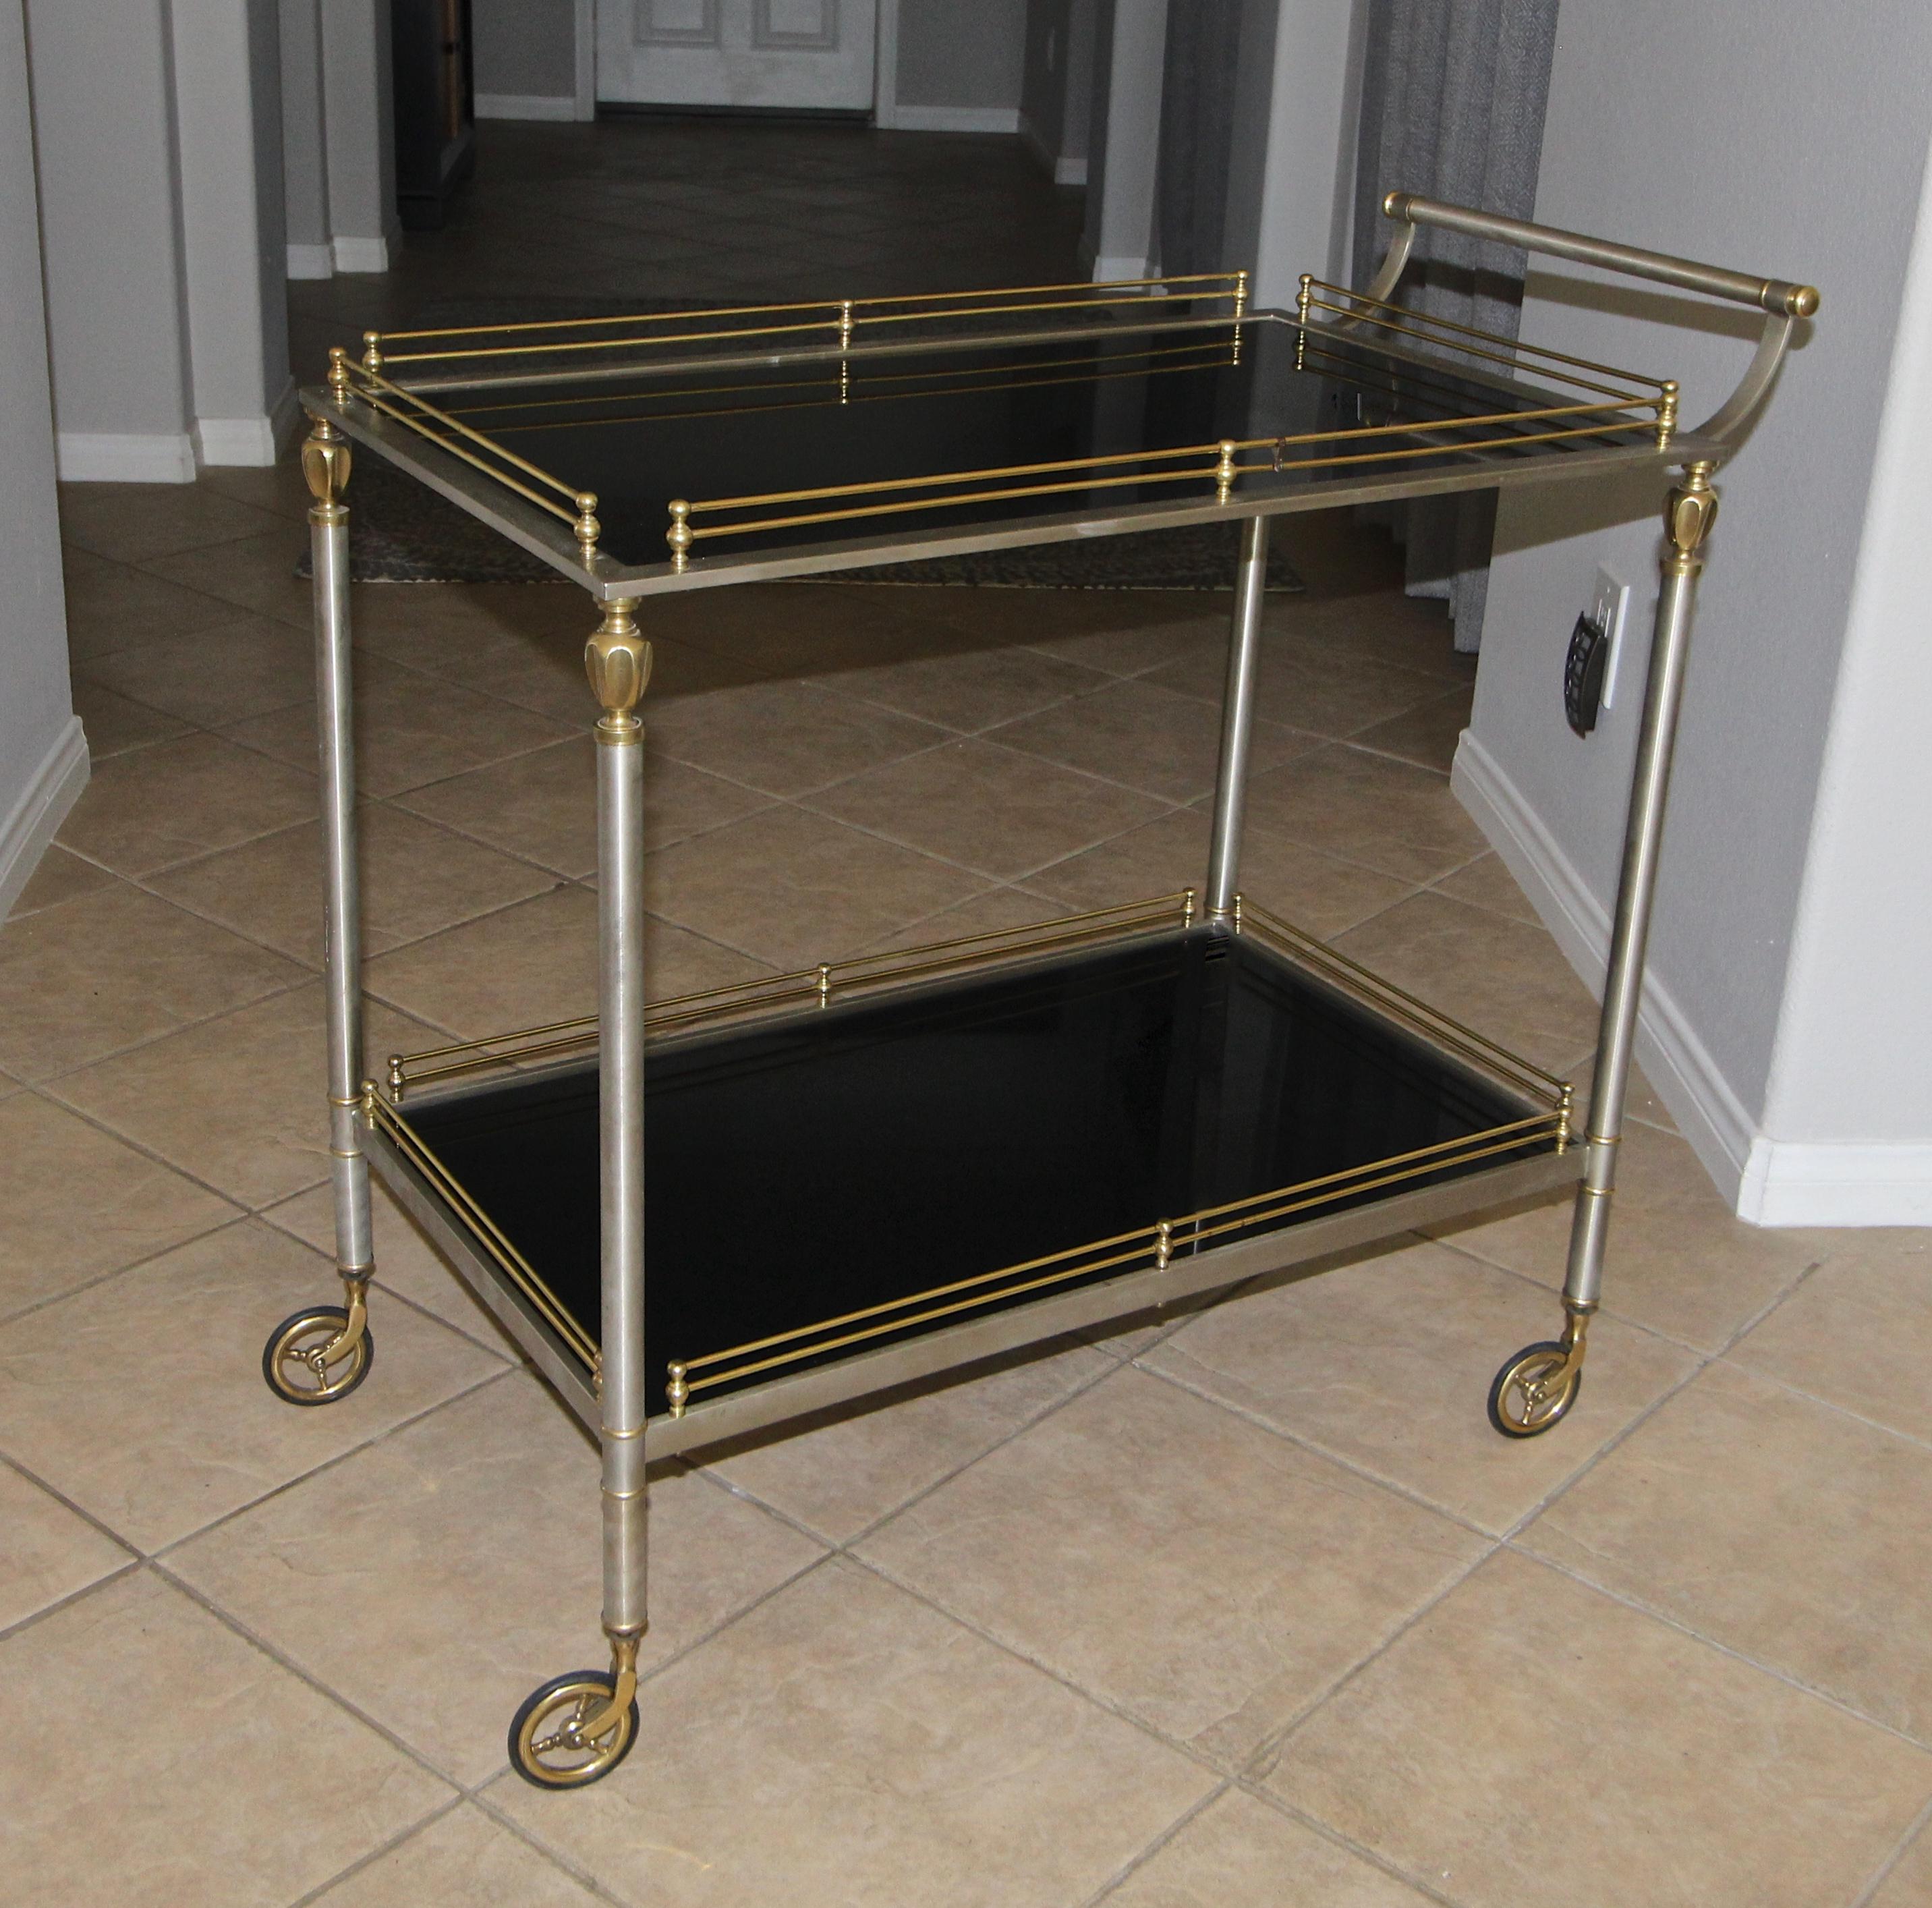 Larger scale brass and brushed steel Italian bar or tea cart, with two-tier black painted glass shelves. Nice detailing including gallery rail and round spoke caster wheels. Height to top of second self 30.5